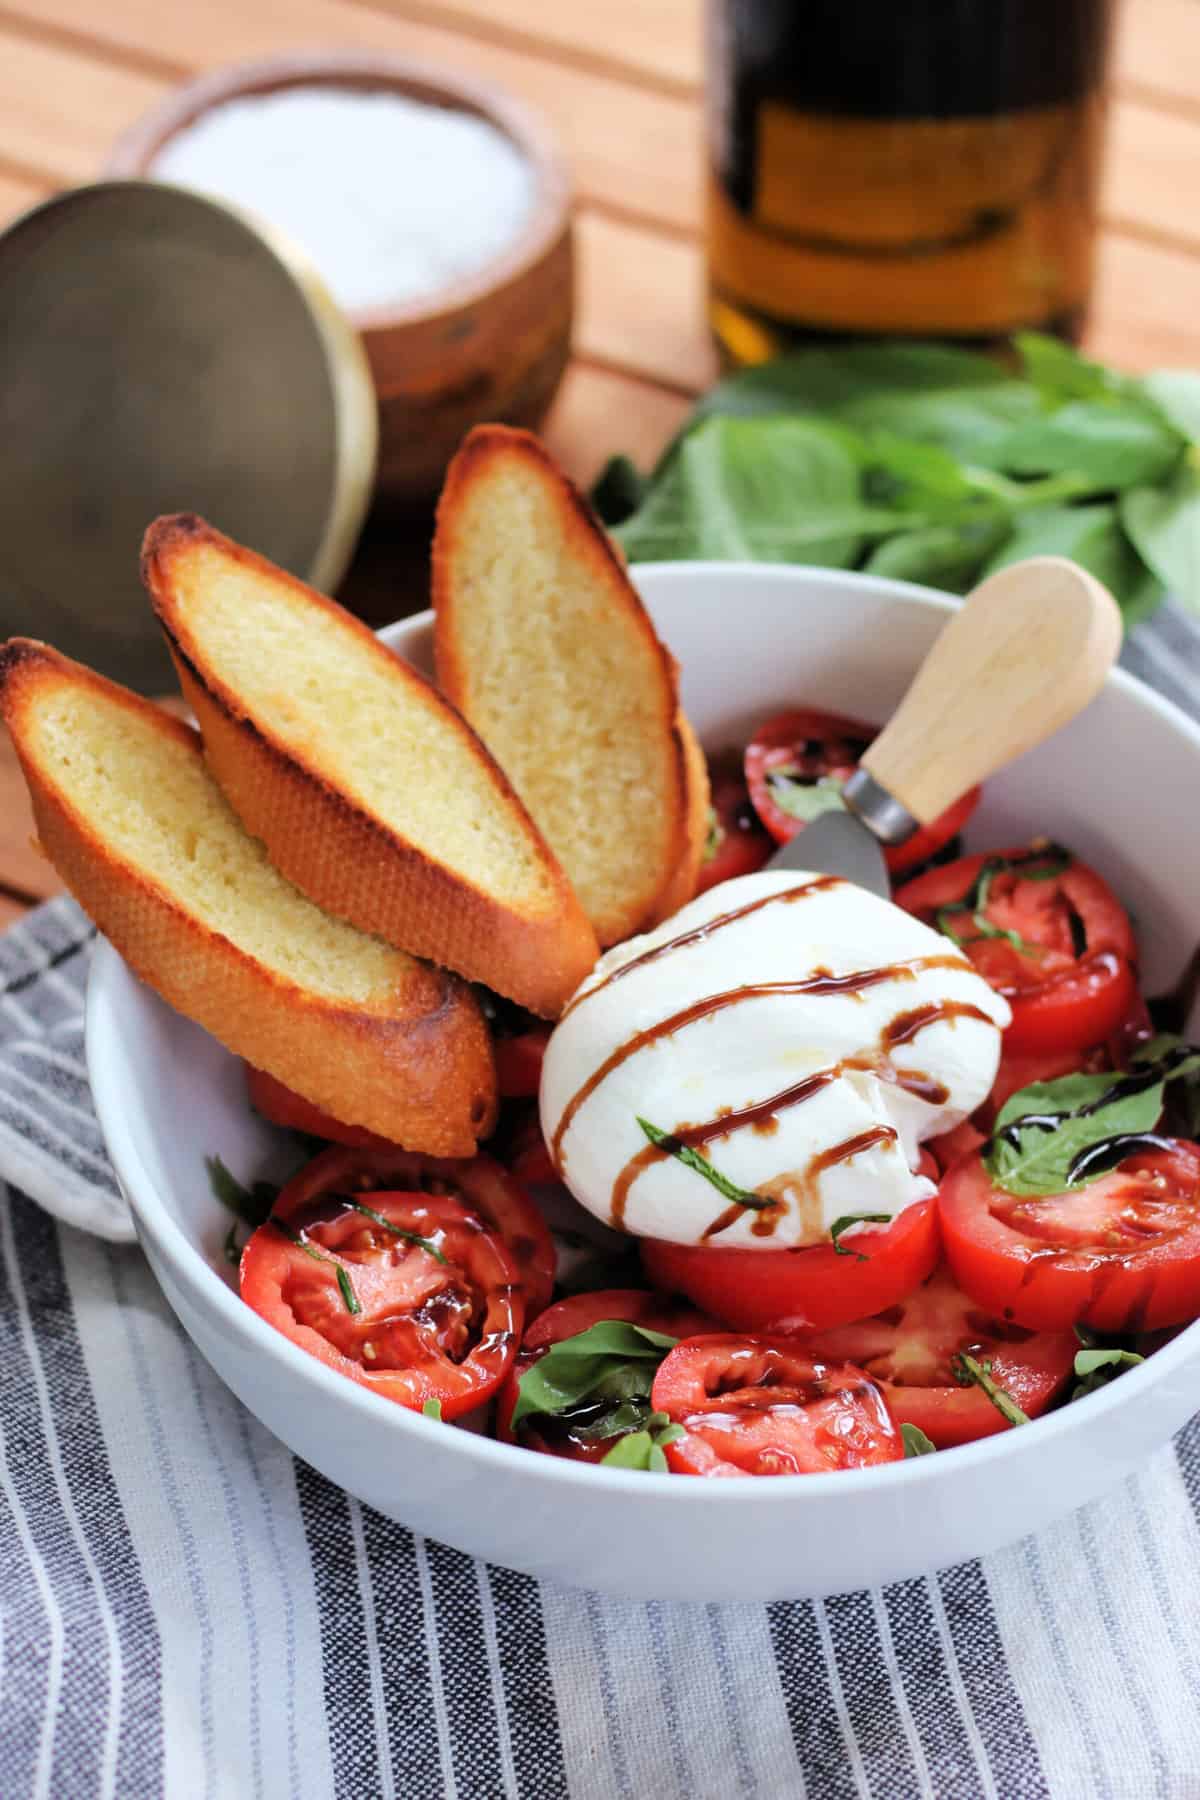 Burrata Caprese in a white bowl with toasted bread slices.